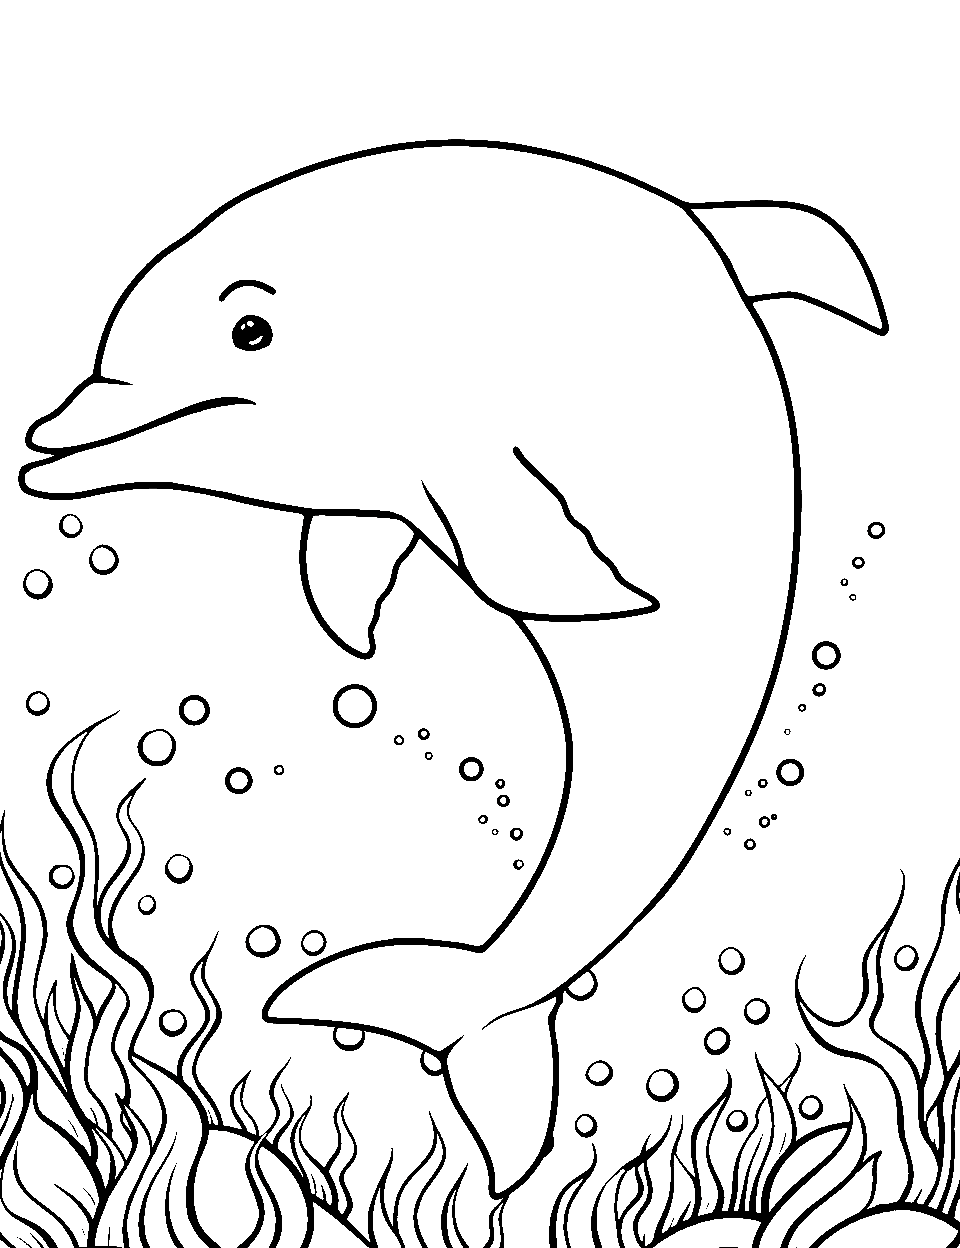 Playful Dolphin Tumbling Coloring Page - A playful dolphin joyfully performing a tumble underwater.